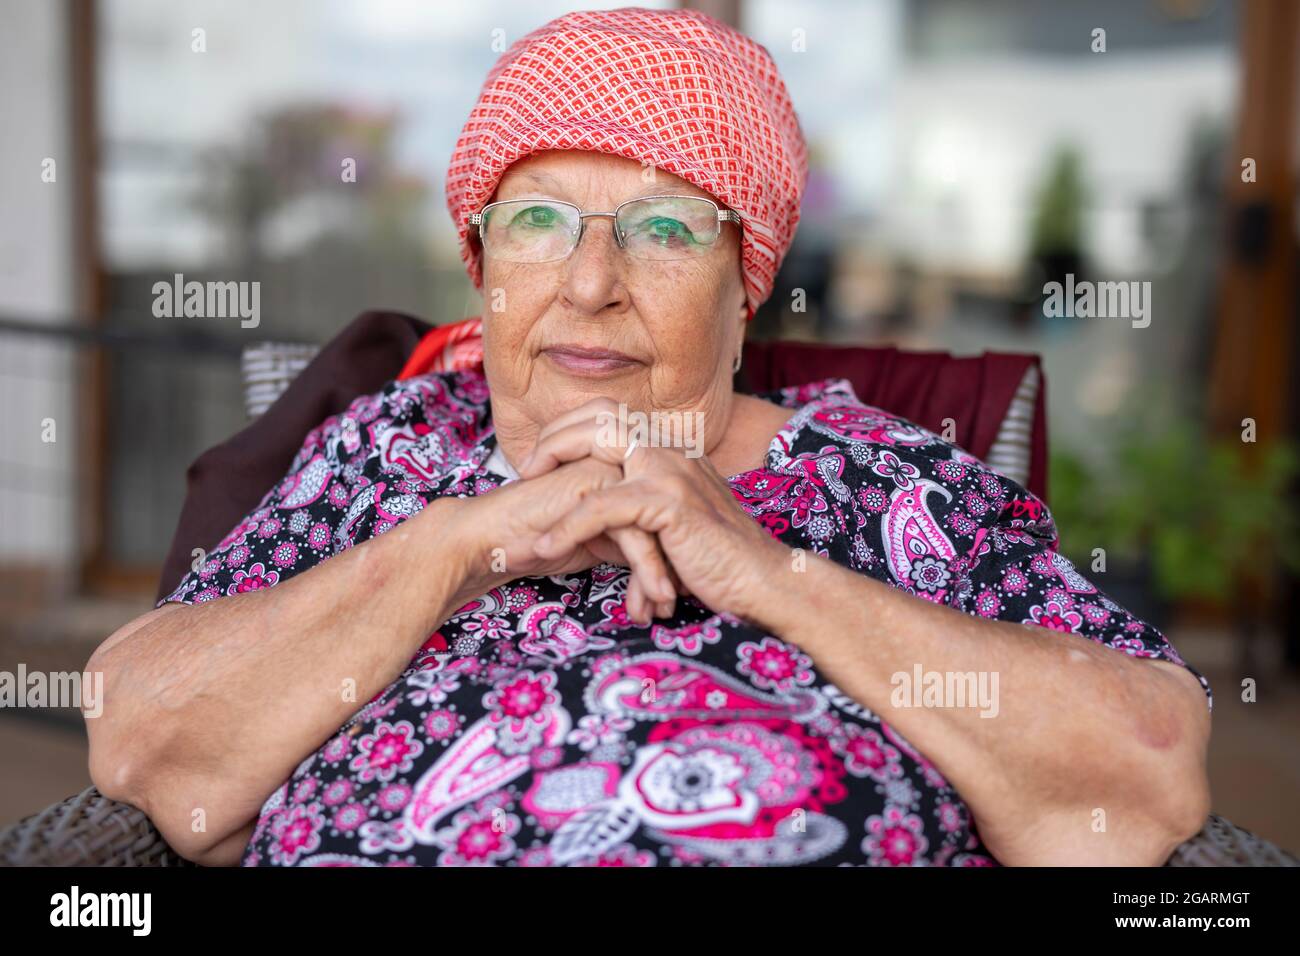 Portrait of a beautiful old woman with gray hair and glasses Stock Photo